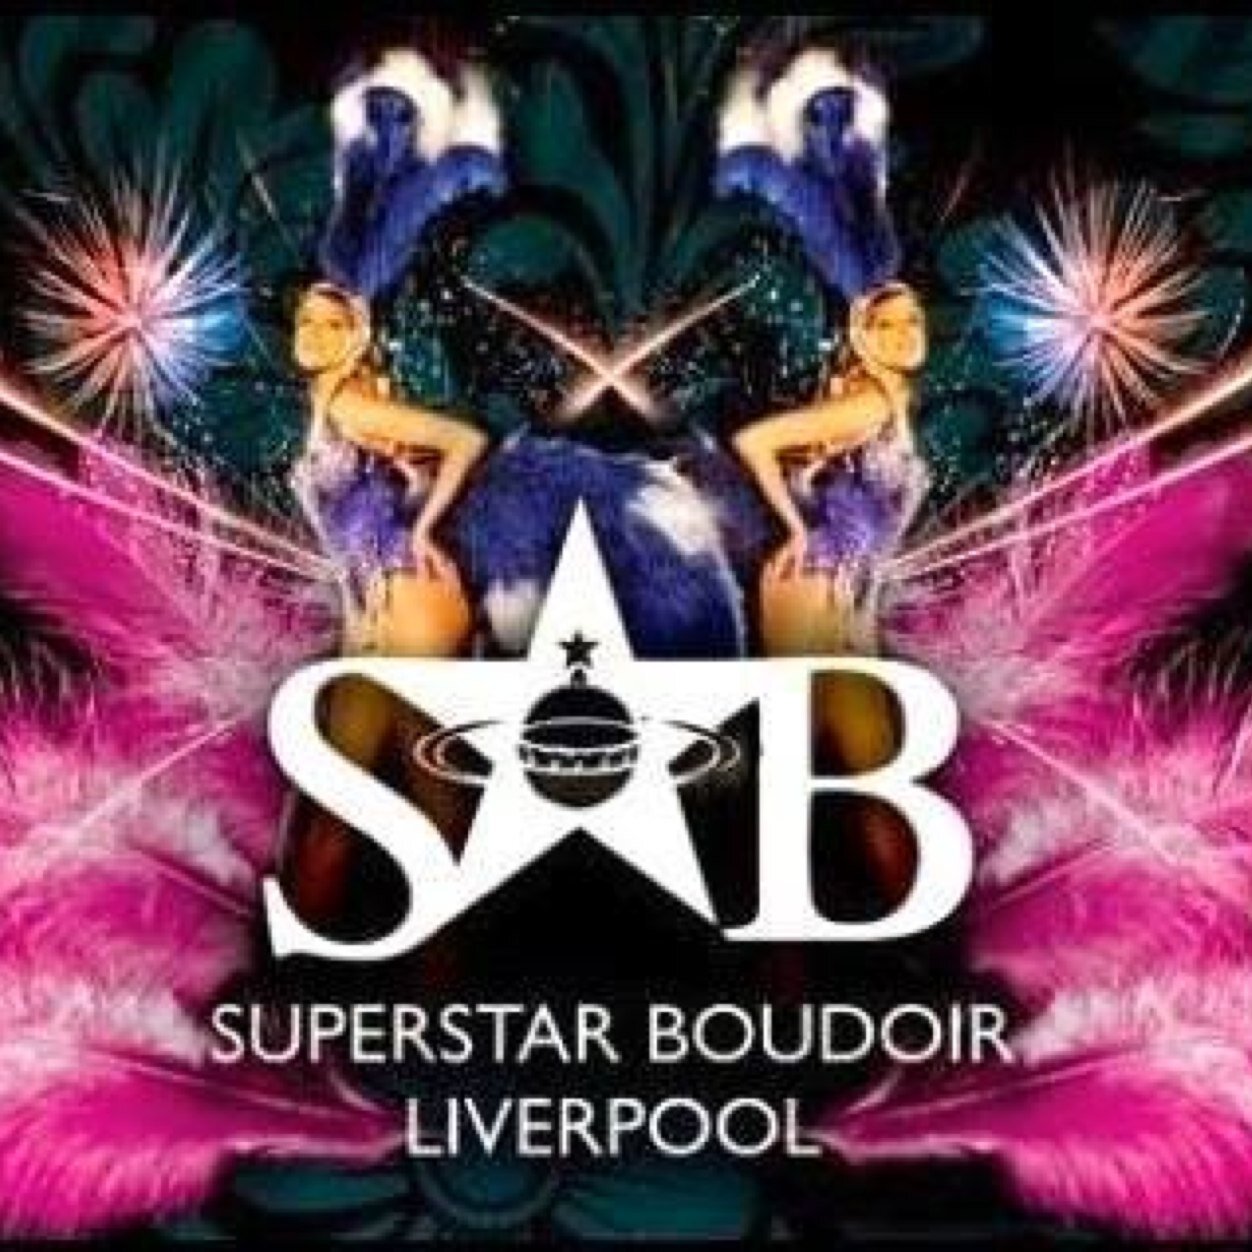 ⭐️Liverpool's No1 Drag Venue!!⭐️Liverpools most entertaining and diverse Club/Bar 7 nights a week. Open late for gay and straight and normal people welcome.